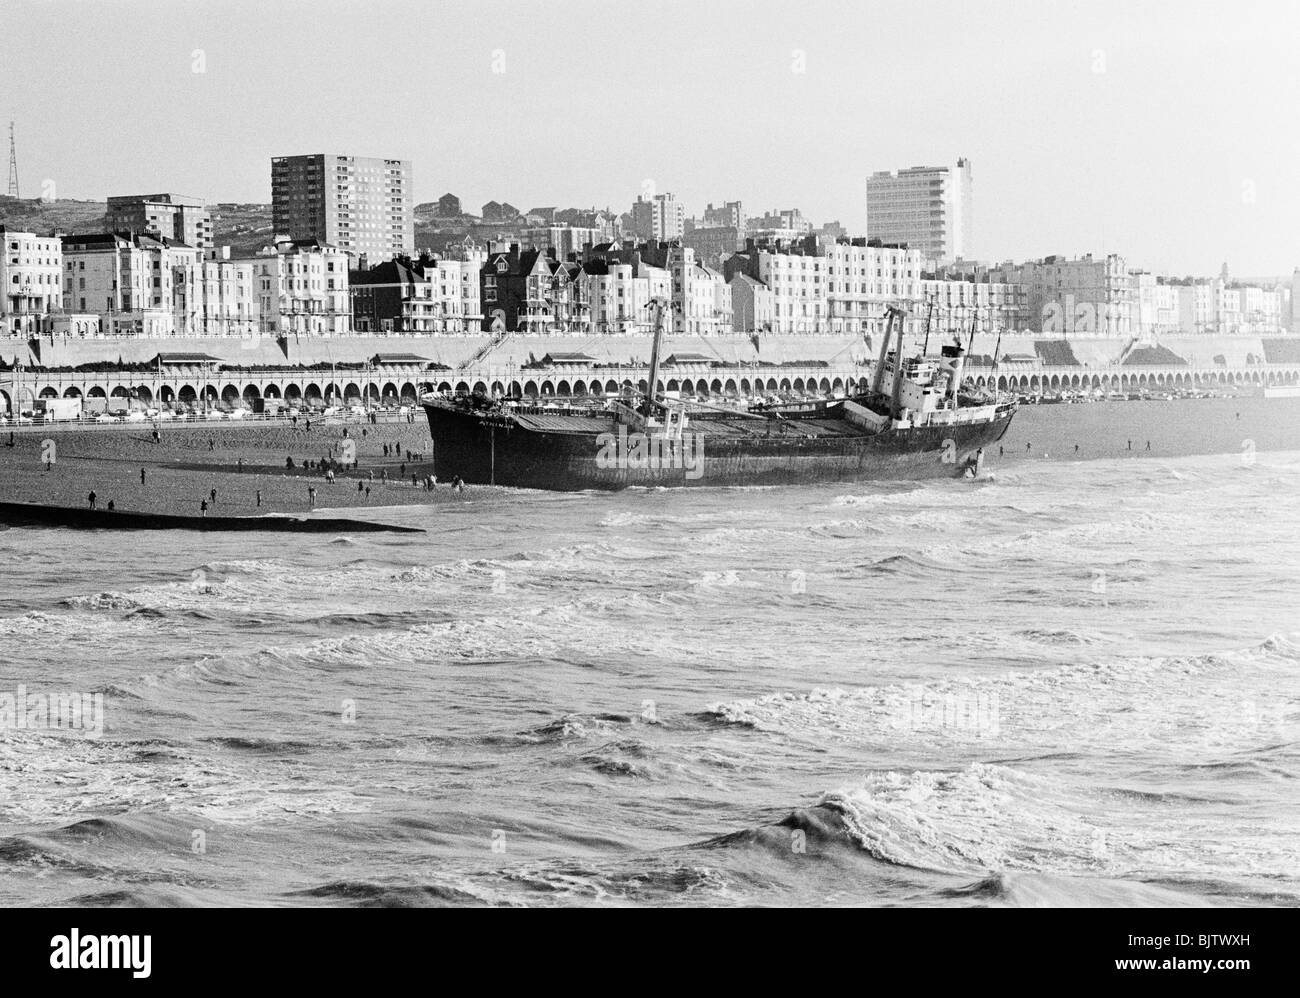 The Athina B, a Greek cargo ship which was grounded on Brighton Beach in 1980 after colliding with the Palace Pier in the dark. Stock Photo